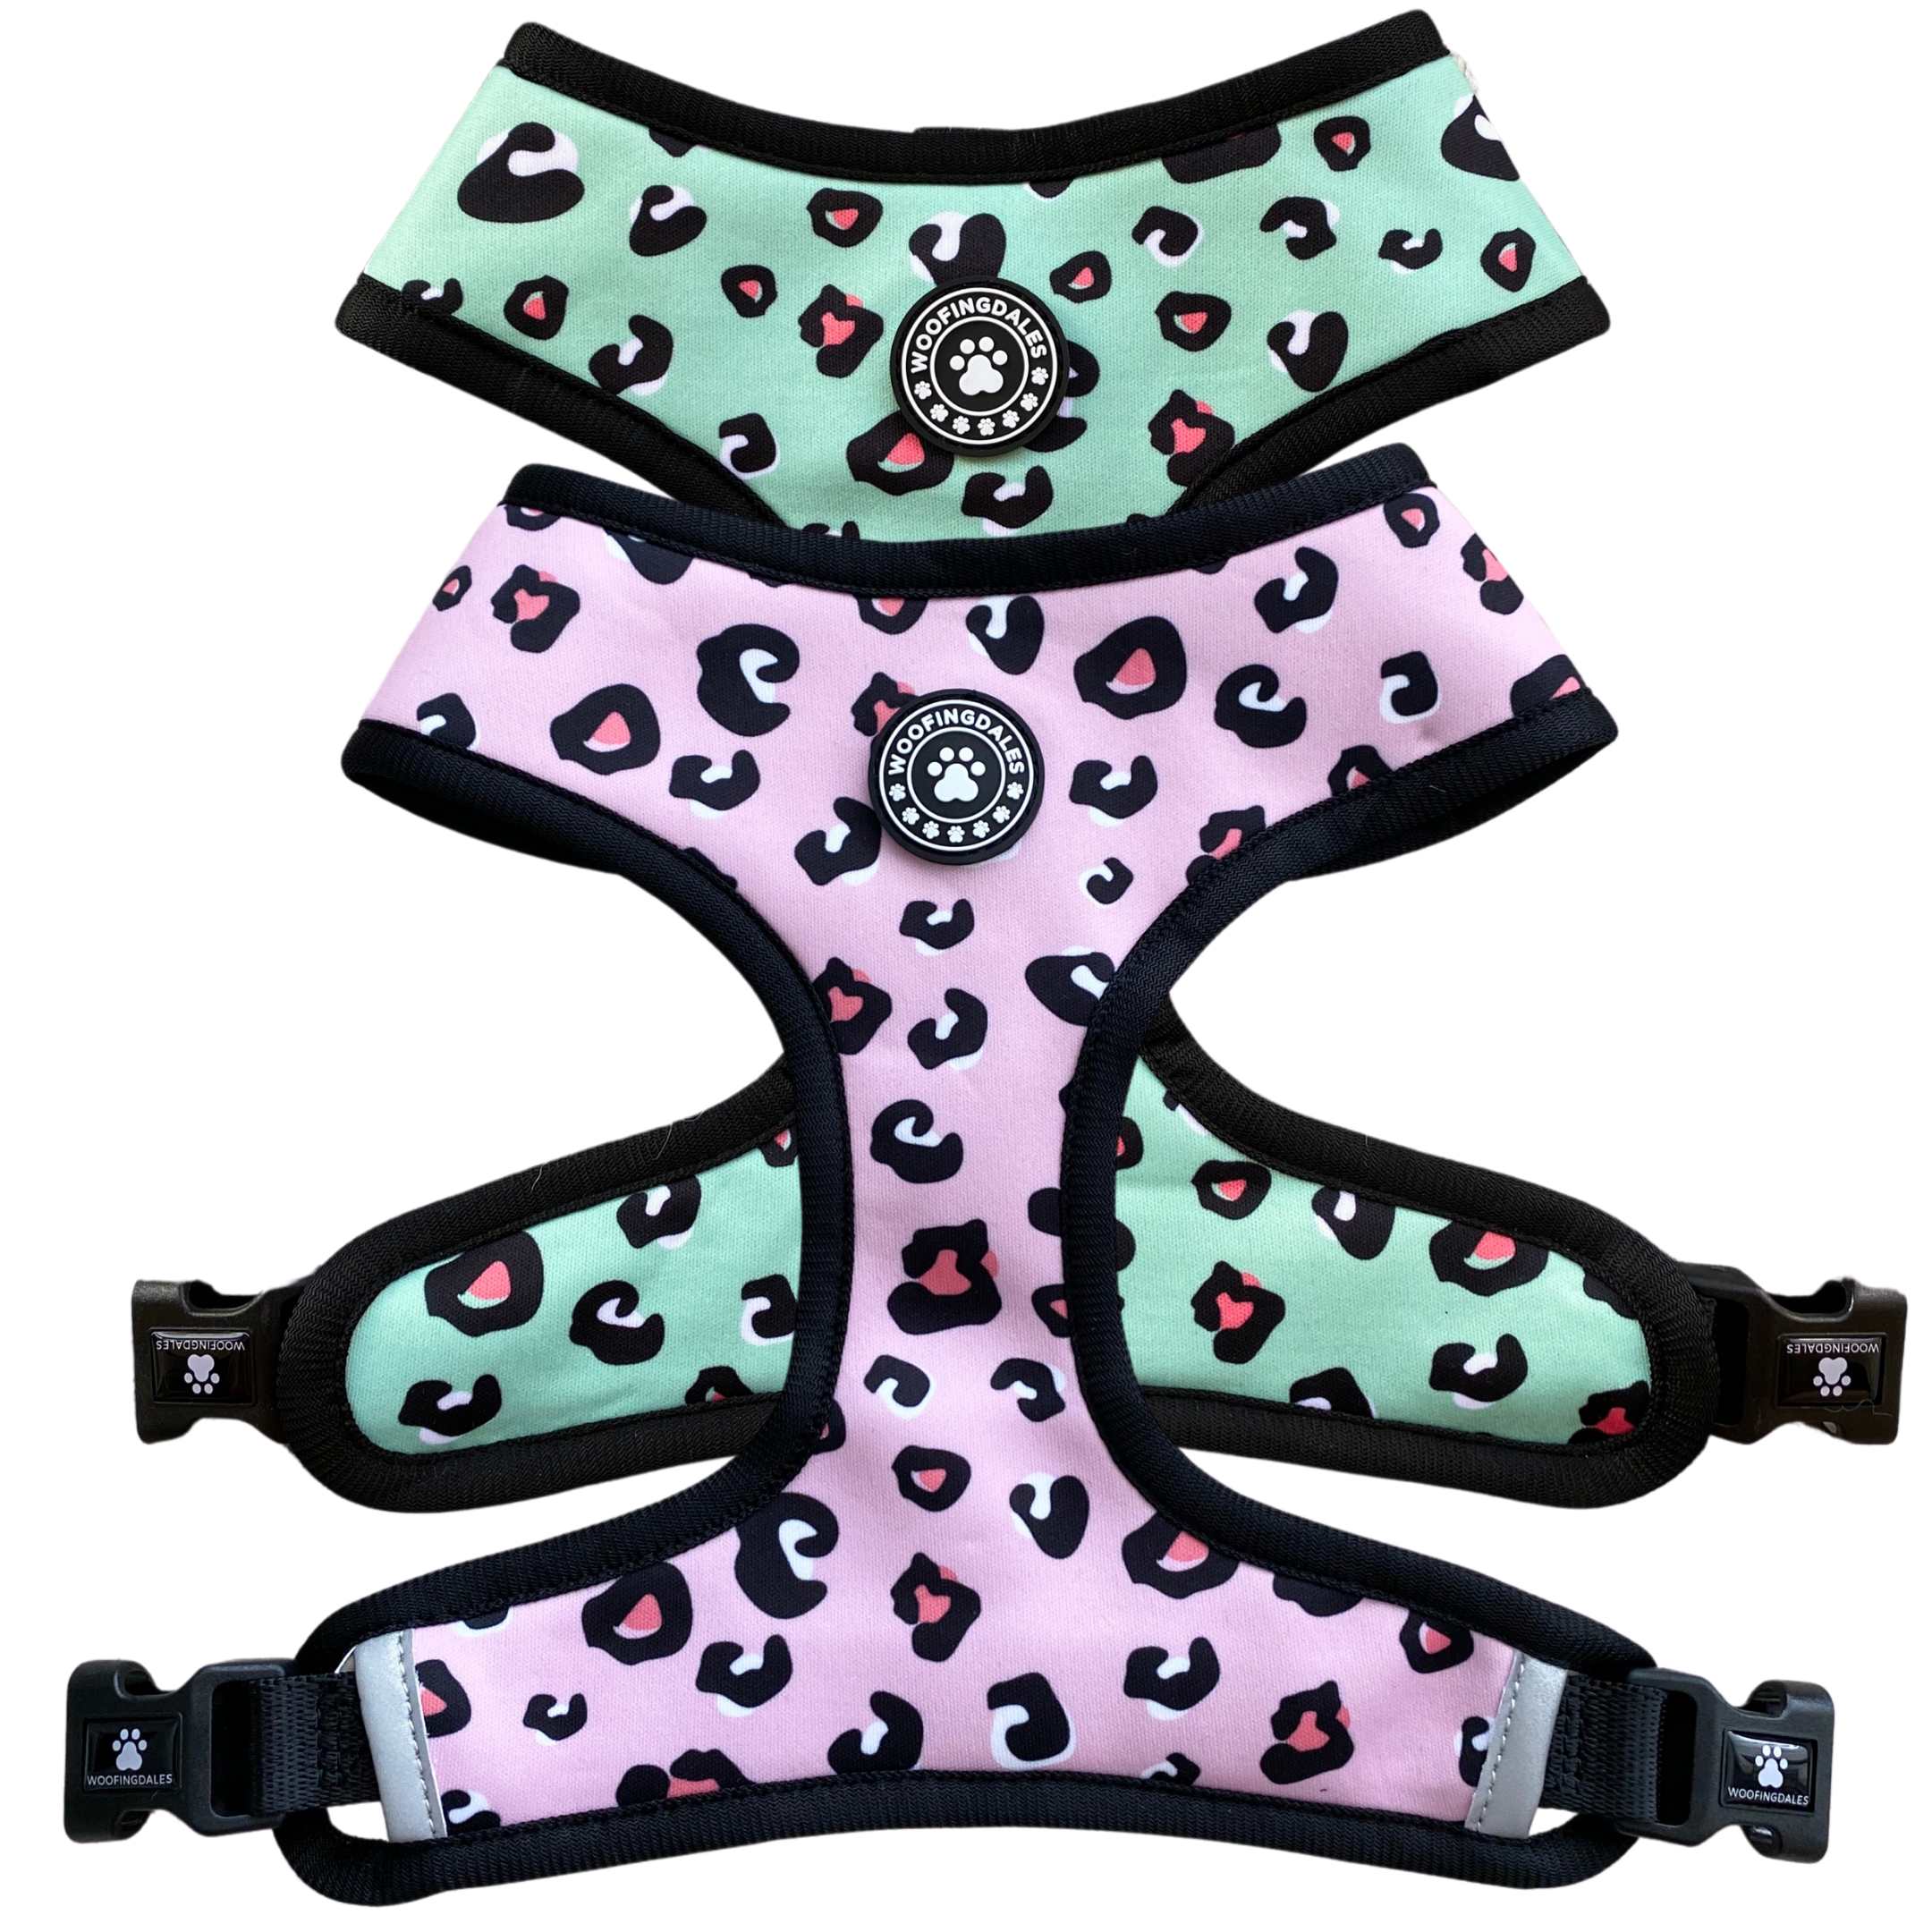 Neon Leopard dog harness – The Woof Woof